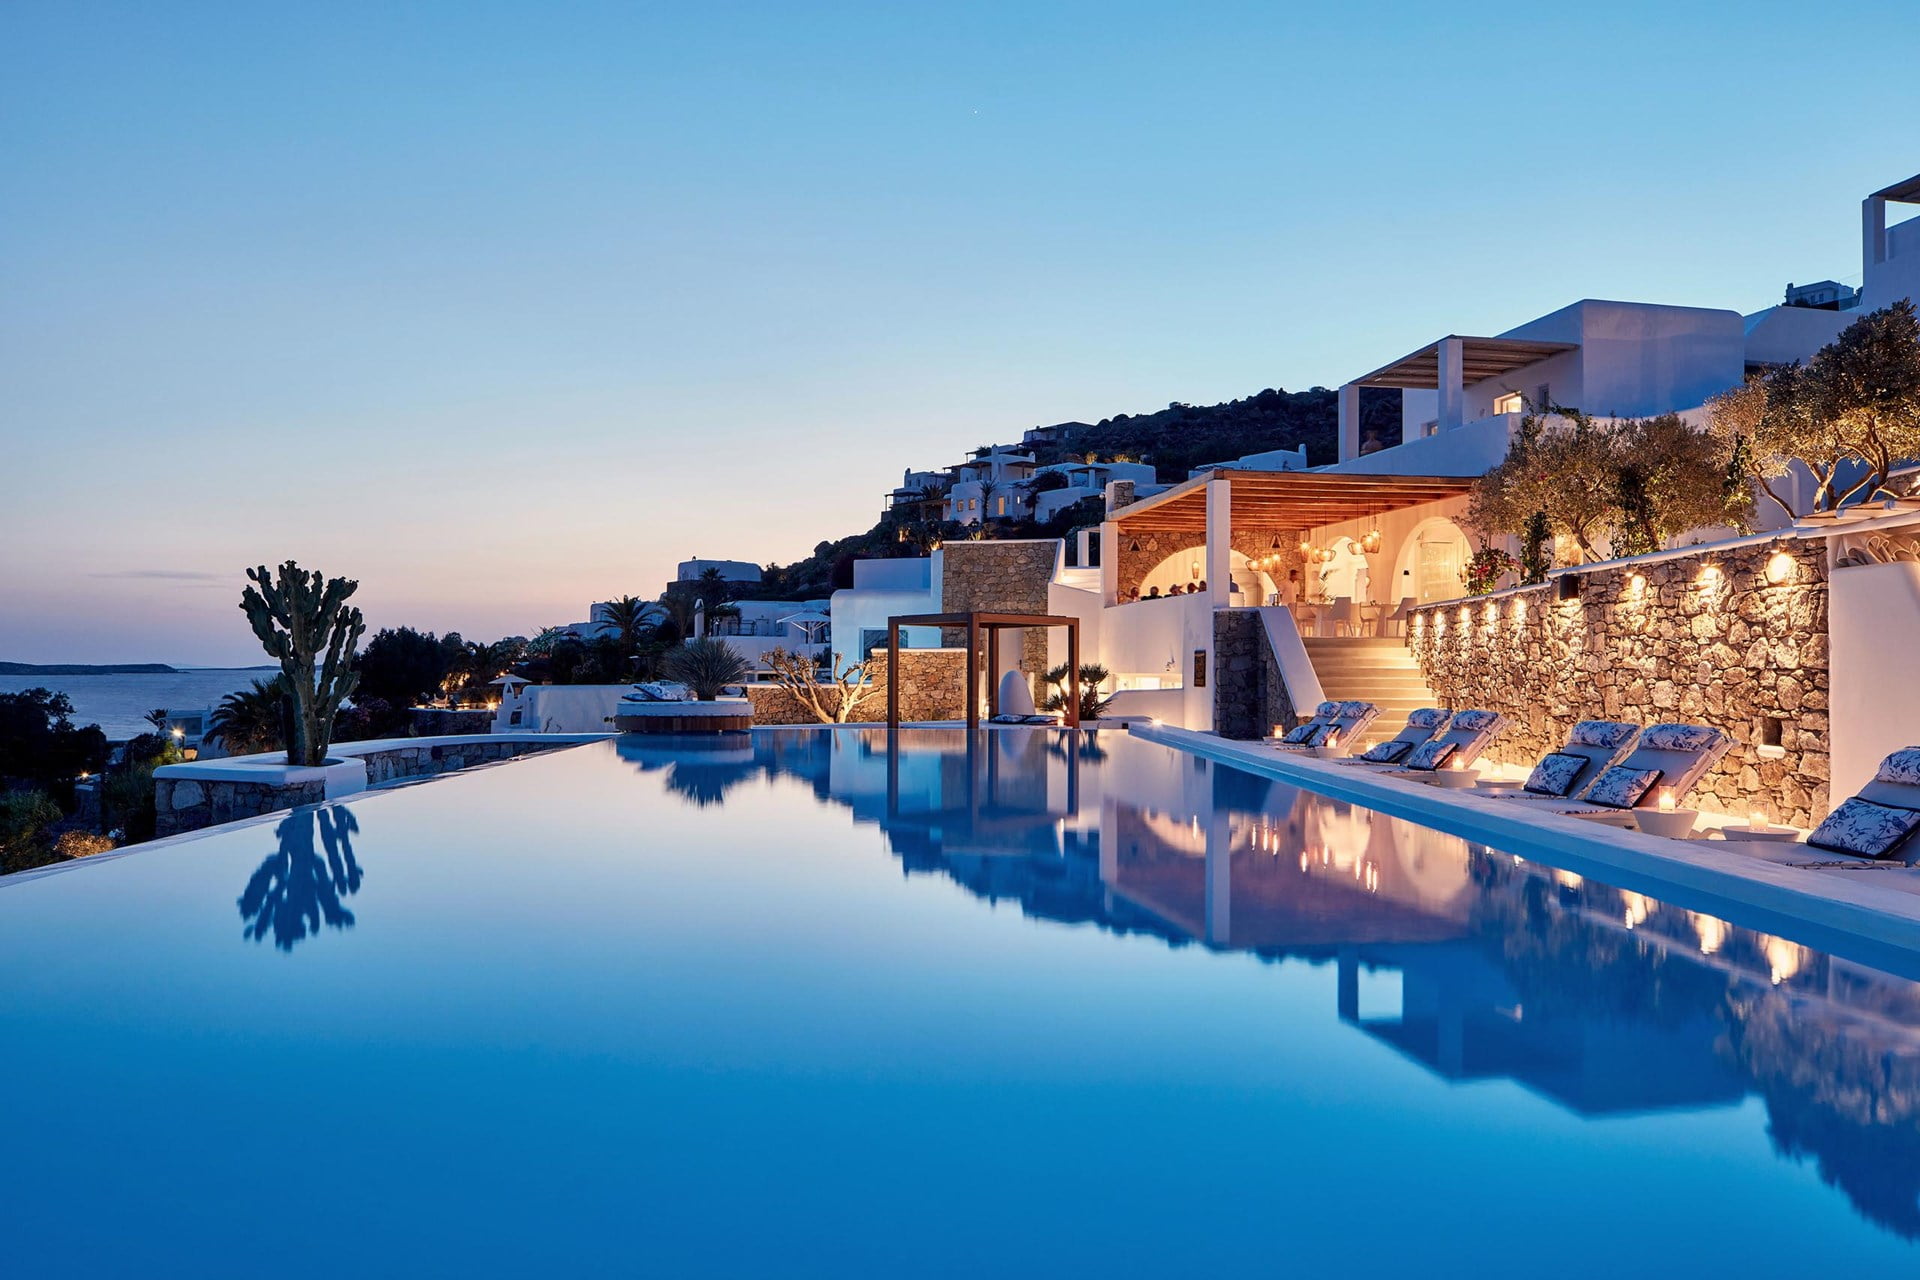 Nighttime view of Katikies hotel in Mykonos pool with glowing lights and surrounding buildings.